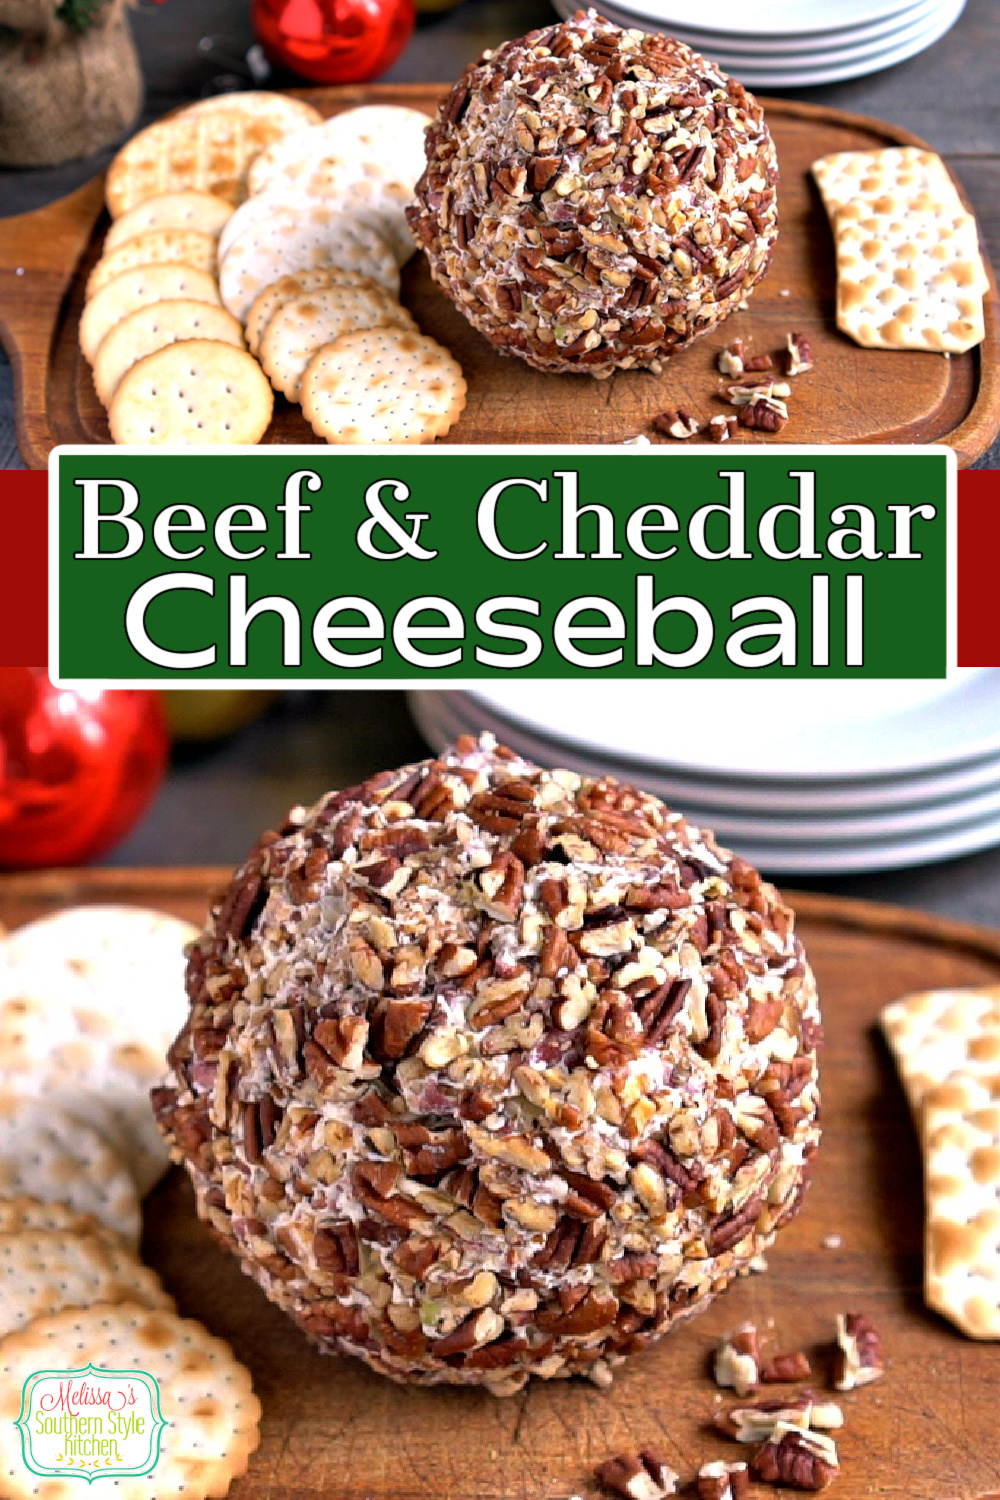 Beef and Cheddar Cheeseball is ideal for any occasion when delicious make-ahead starters are on the menu #beefandcheddarcheeseball #cheeseball #beefcheeseballreipes #holidayappetizers #easyappetizers #beef #footballsnacks #cheddarcheeseballs #easyrecipes #southernfood #southernrecipes via @melissasssk